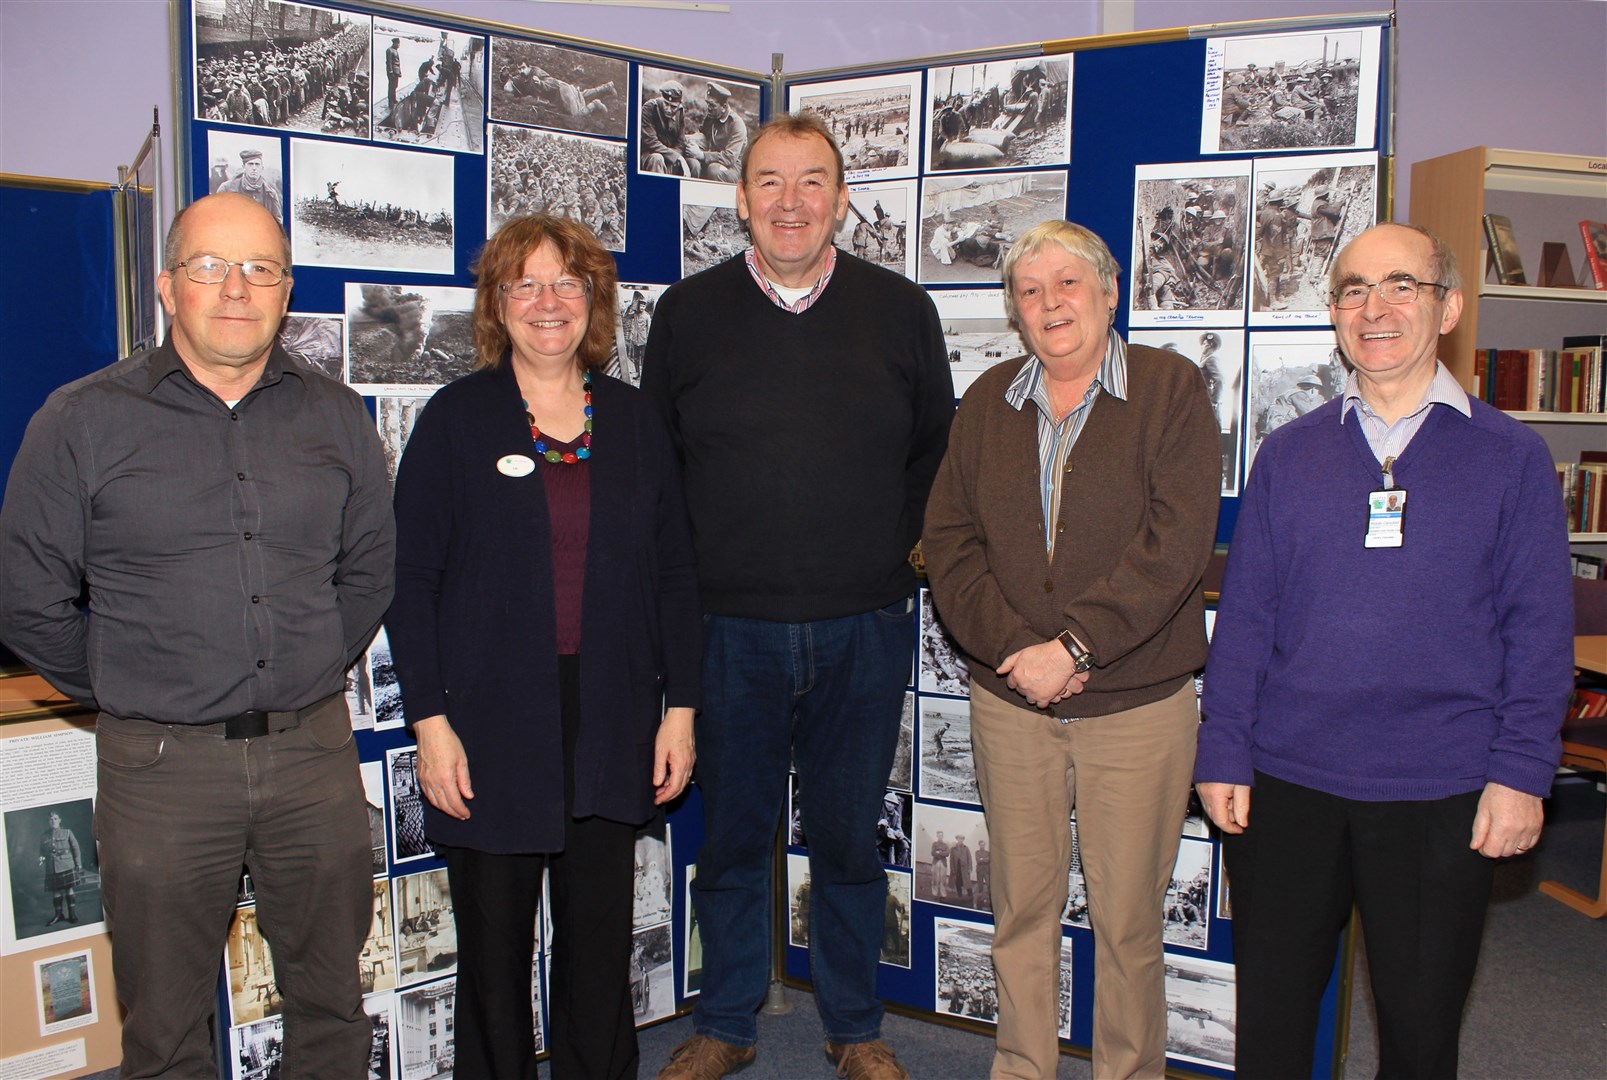 Members of the Western Front Association during a previous exhibition at Elgin Library.